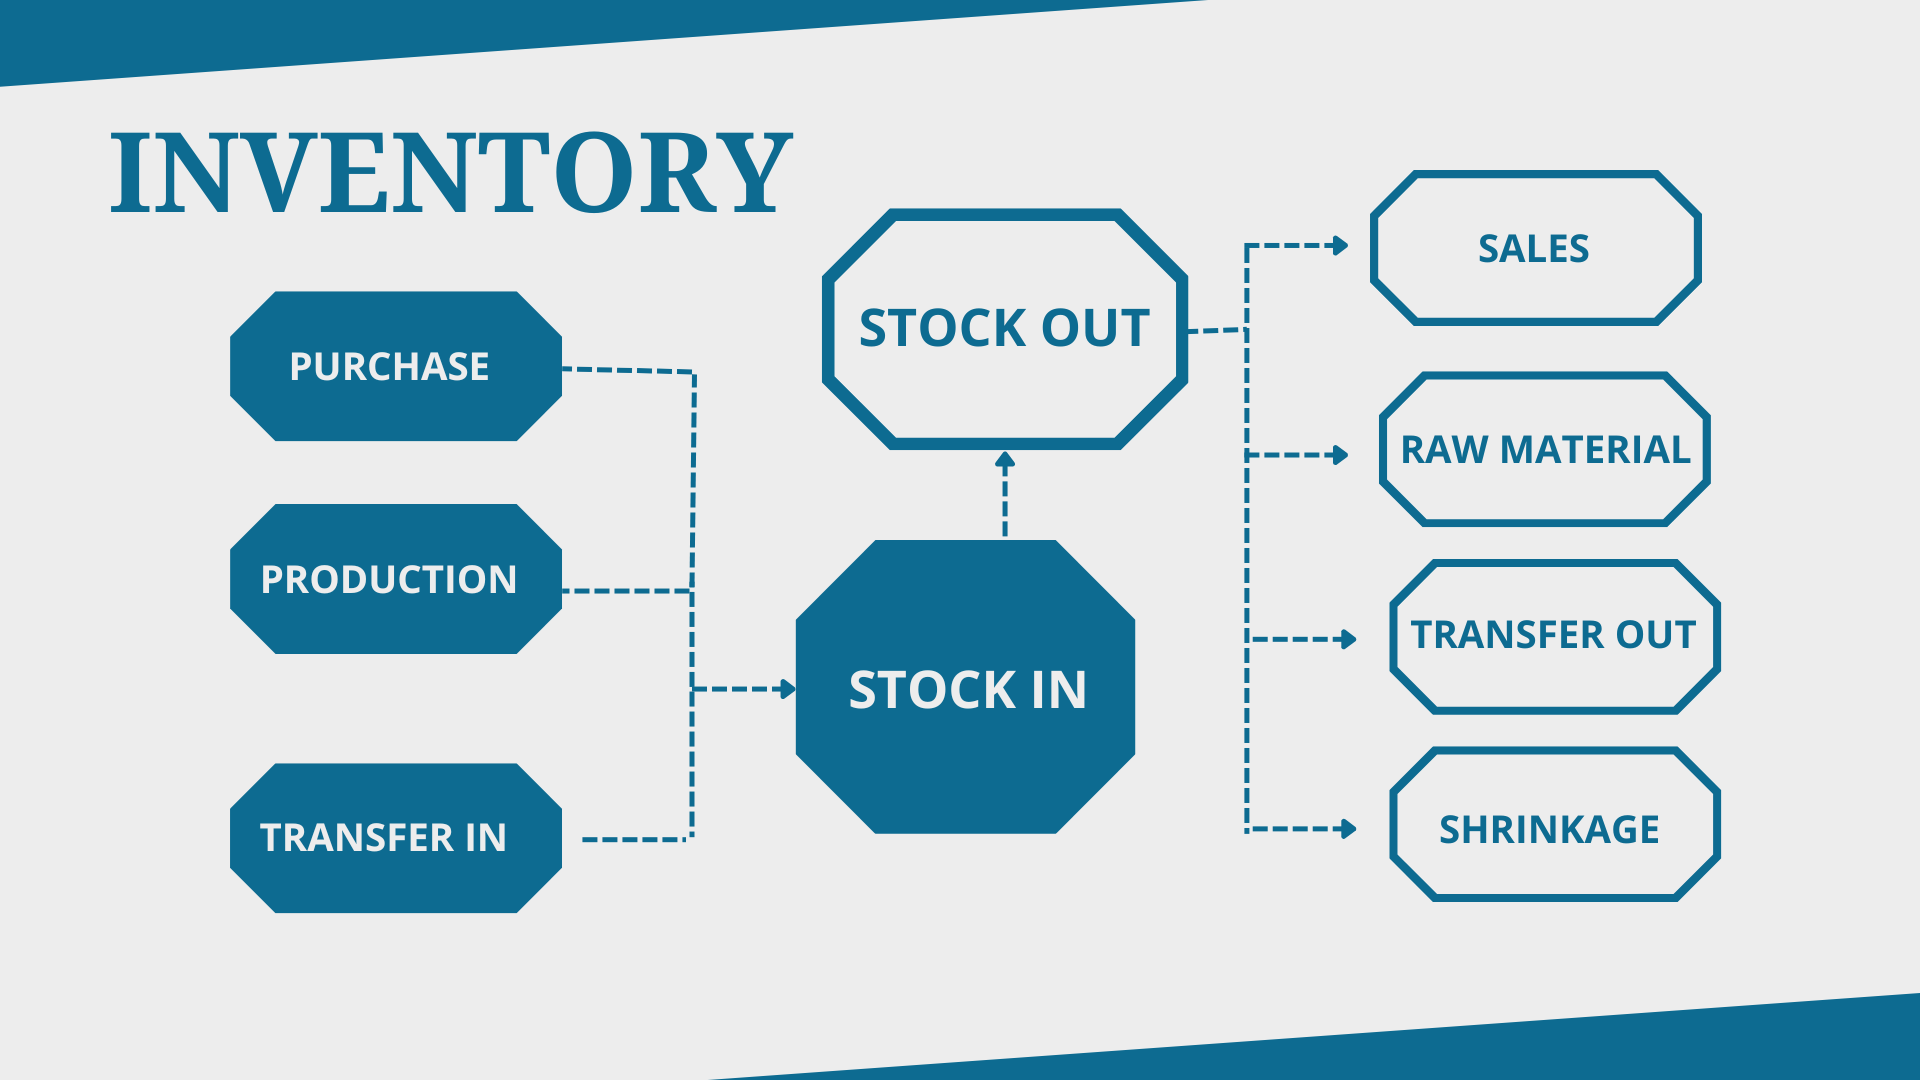 research on inventory management practices